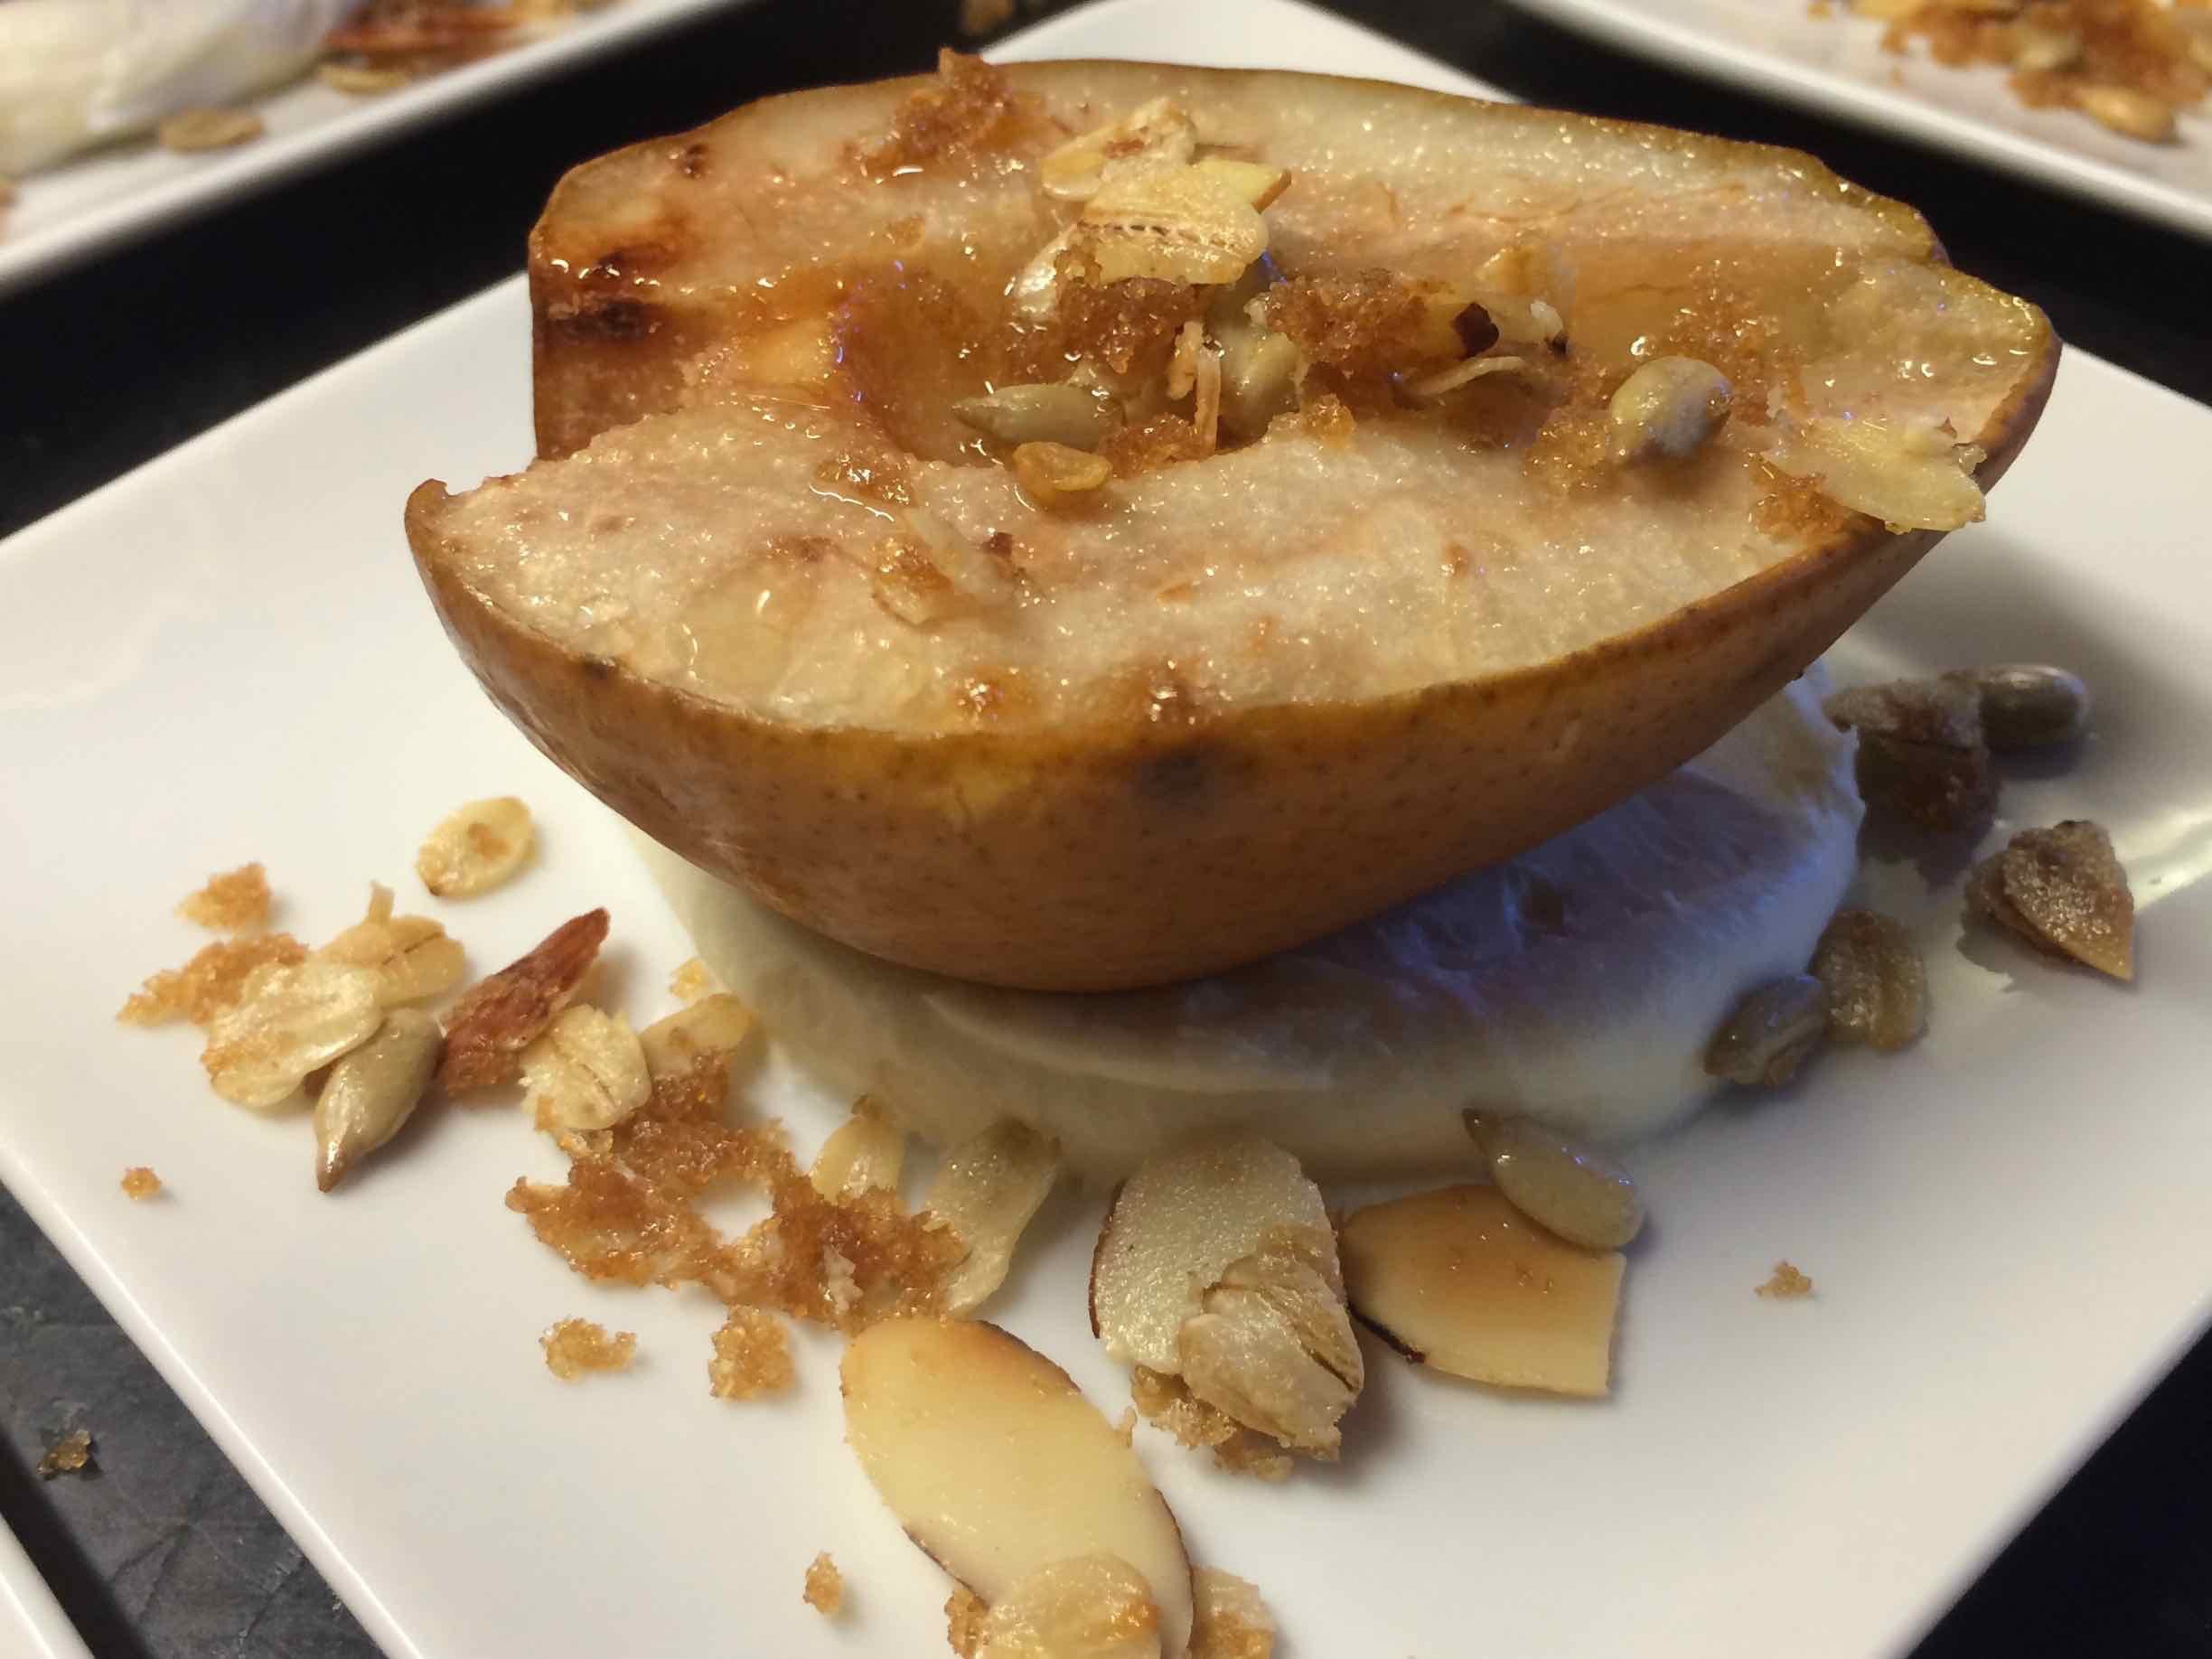 Breakfast at Coach Stop Inn – roasted pear crumble fruit course